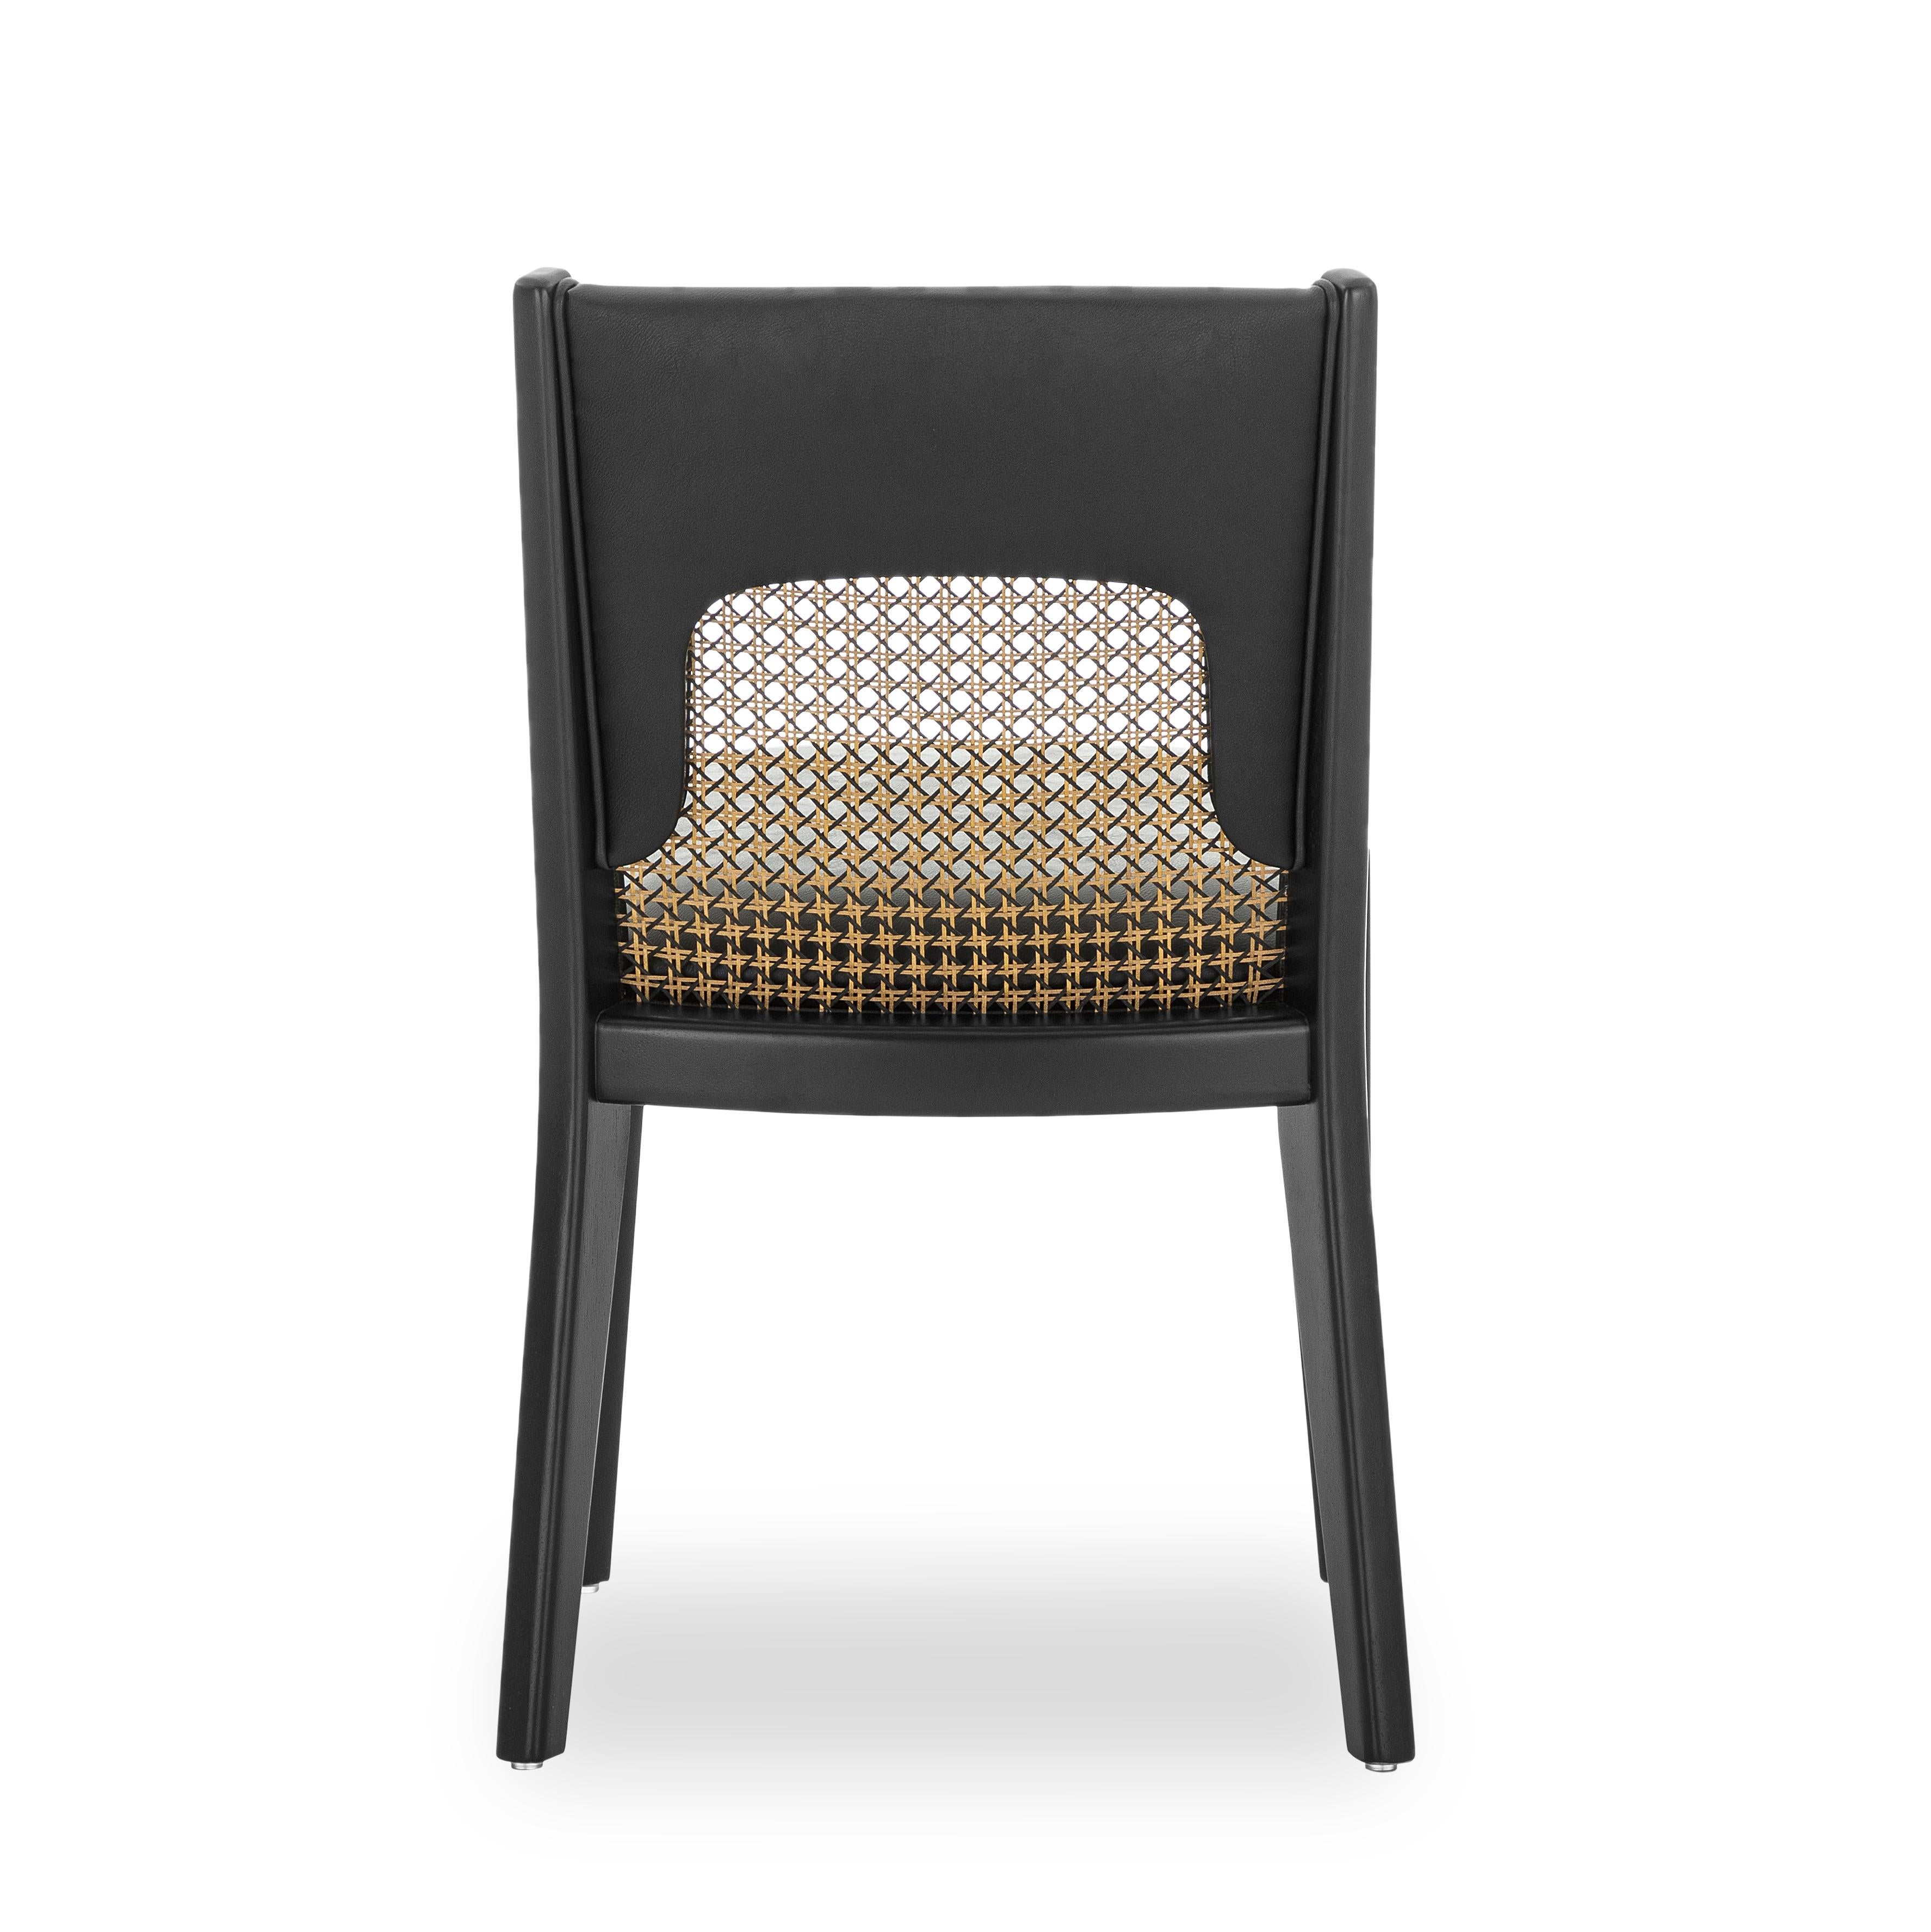 The Zani dining chair is synonymous with style, elegance, comfort, and quality with its black upholstery back and black wood finish. With the Zani chair, Uultis has combined all of these qualities together. A simple cane in the back seat makes a